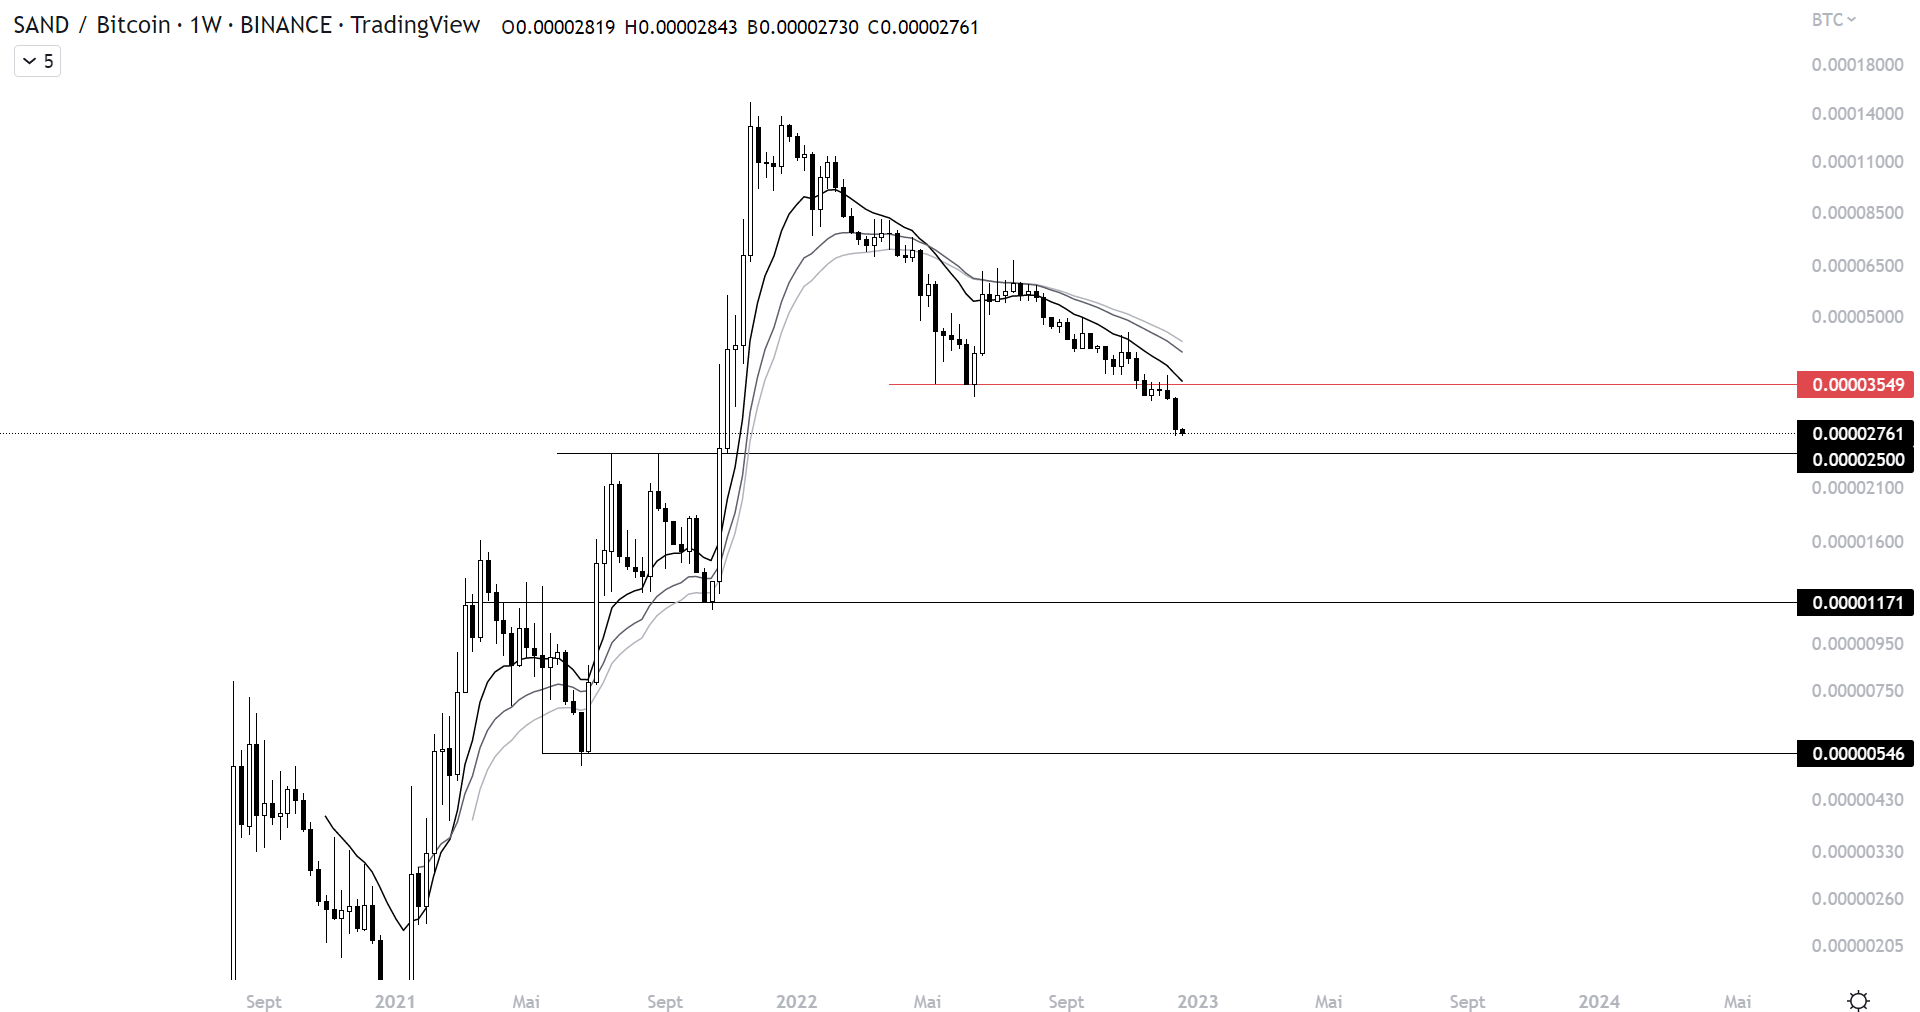 Price Of Sand Against Bitcoin On A Weekly Scale (1W)